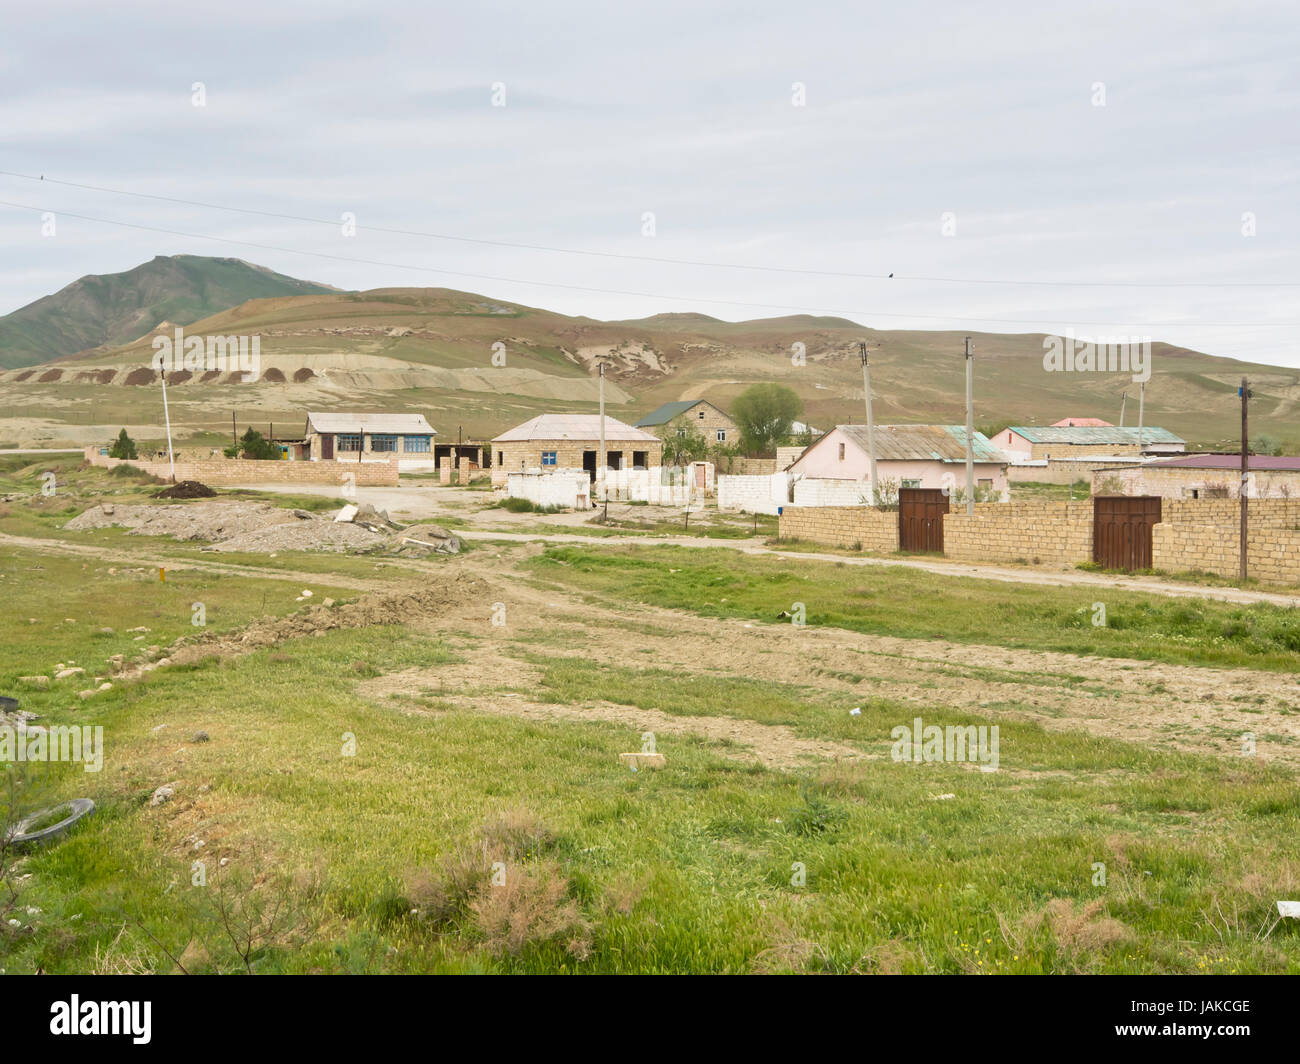 Houses and homes near the village of Jangi (  Cəngi ) one hour west of Baku in Azerbaijan, concrete and sandstone buildings in an open landscape Stock Photo